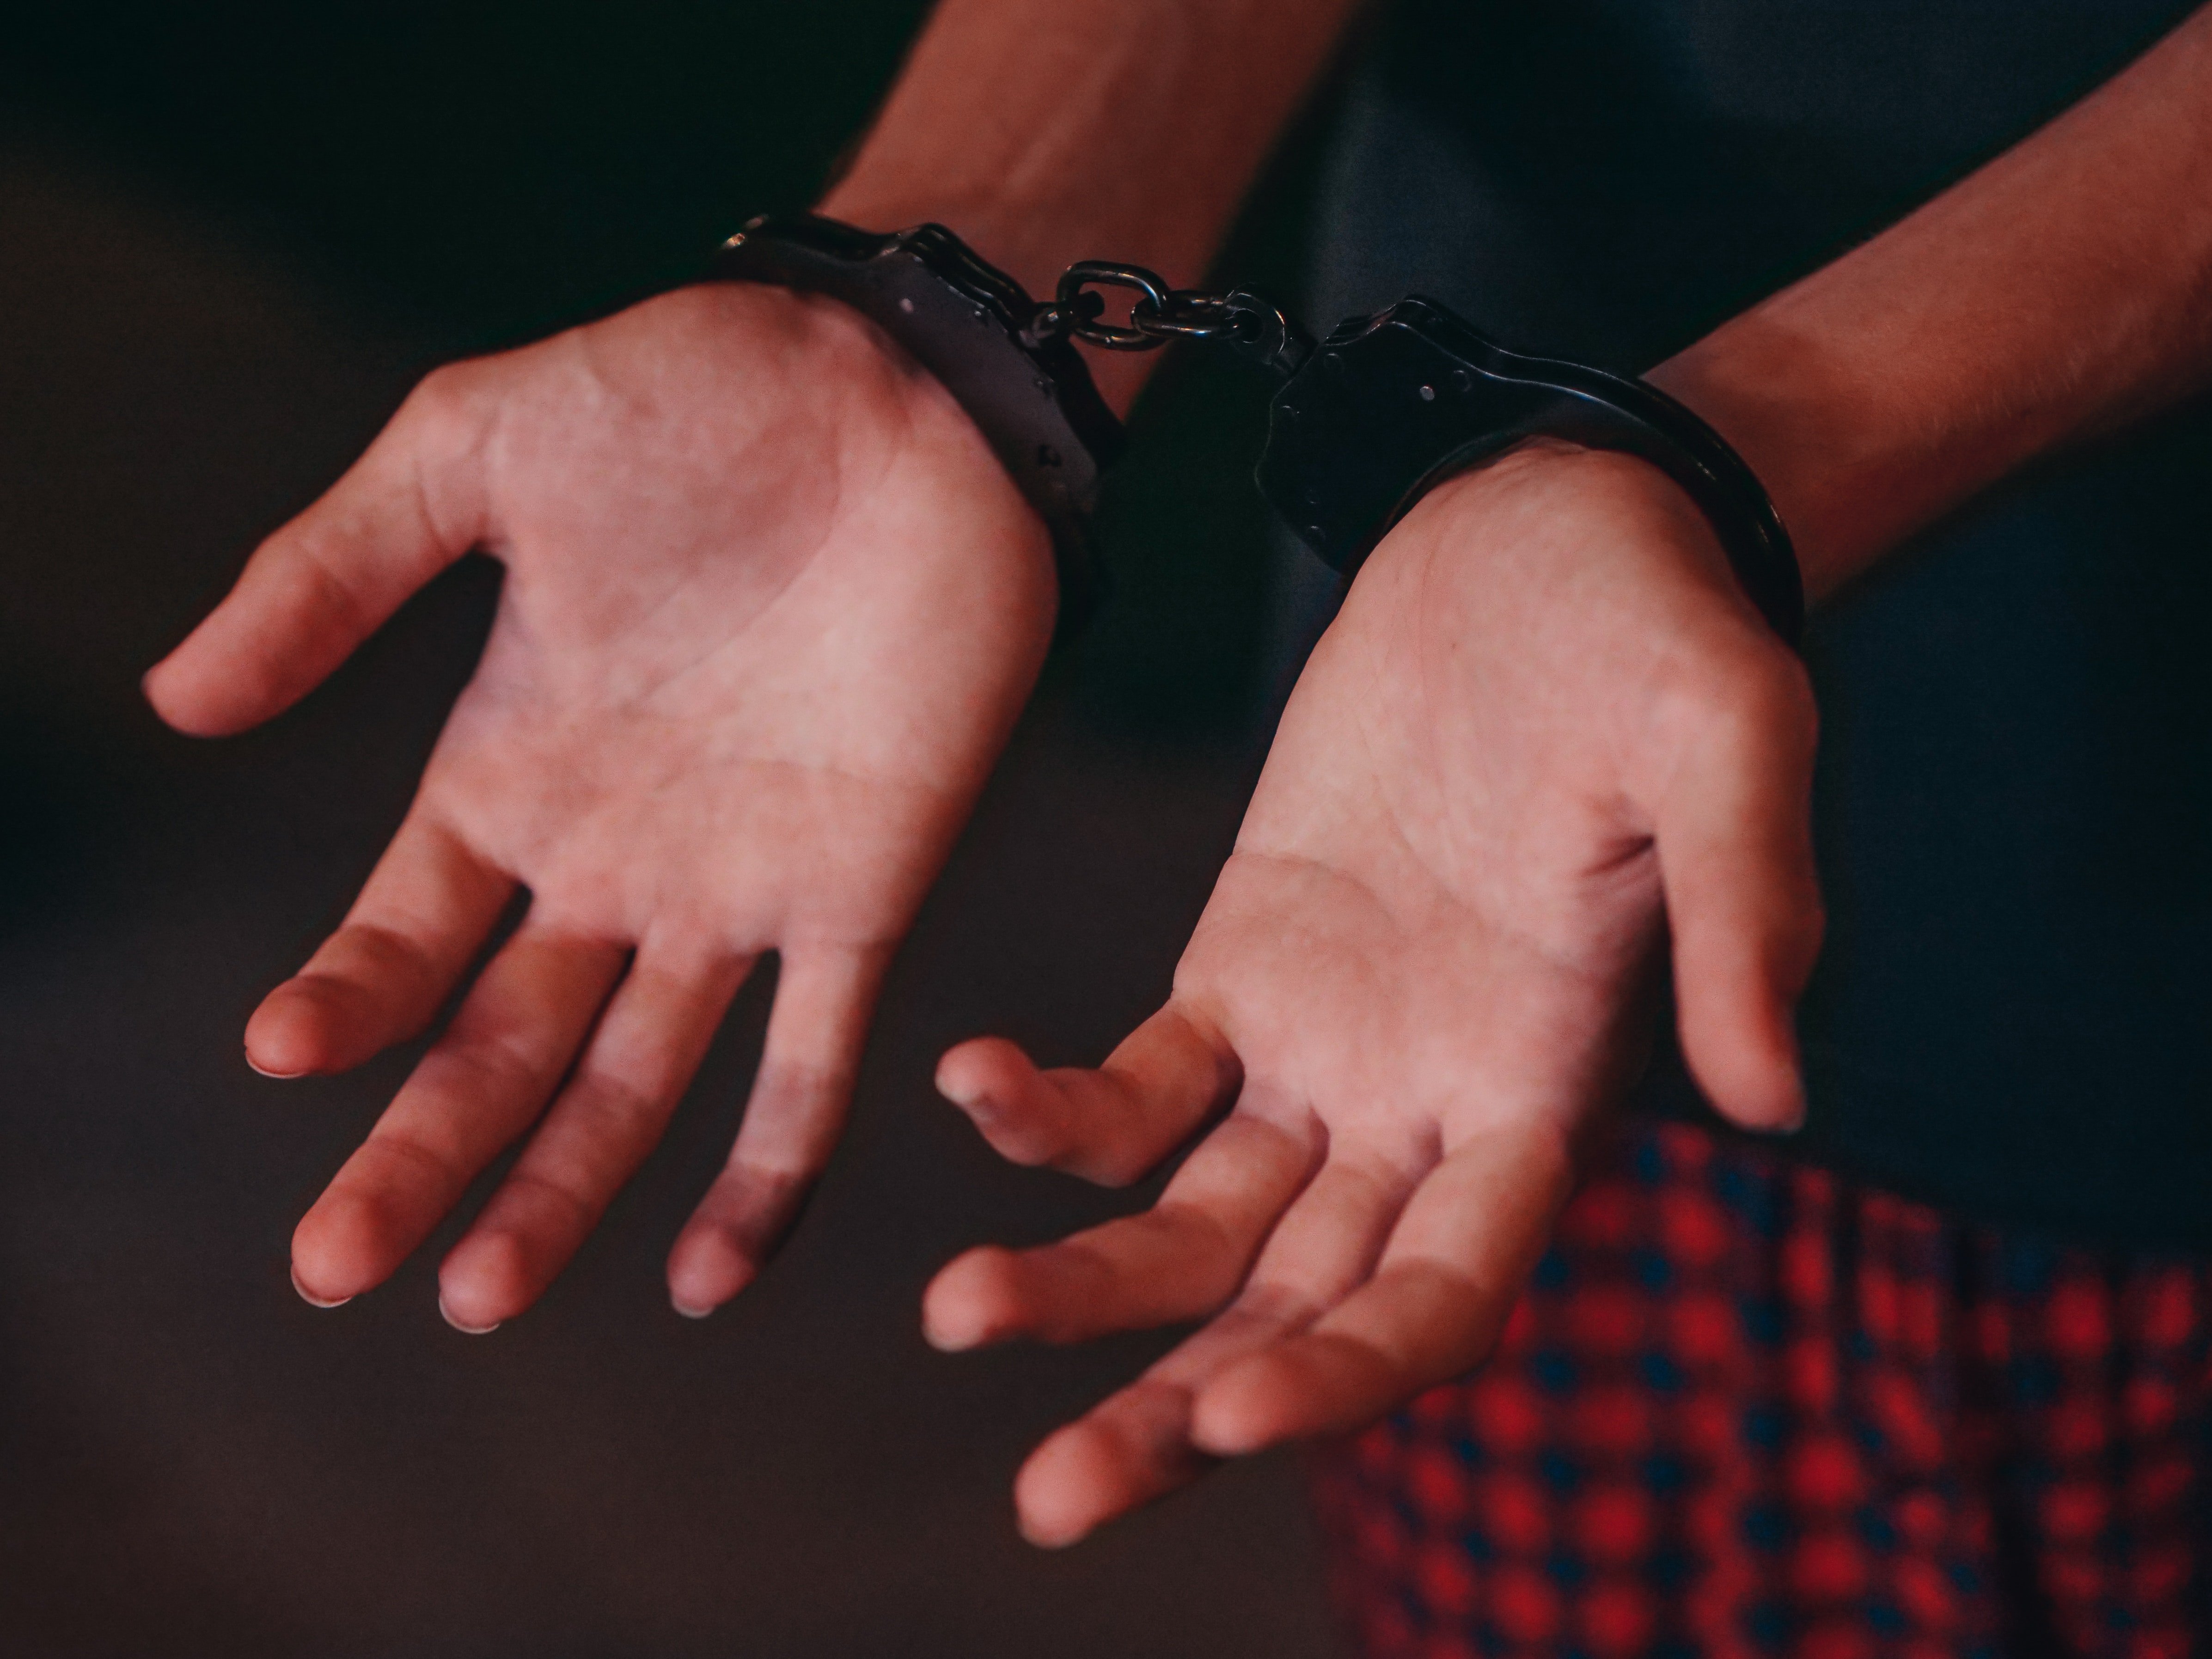 Adam was arrested and brought to the station. | Source: Pexels